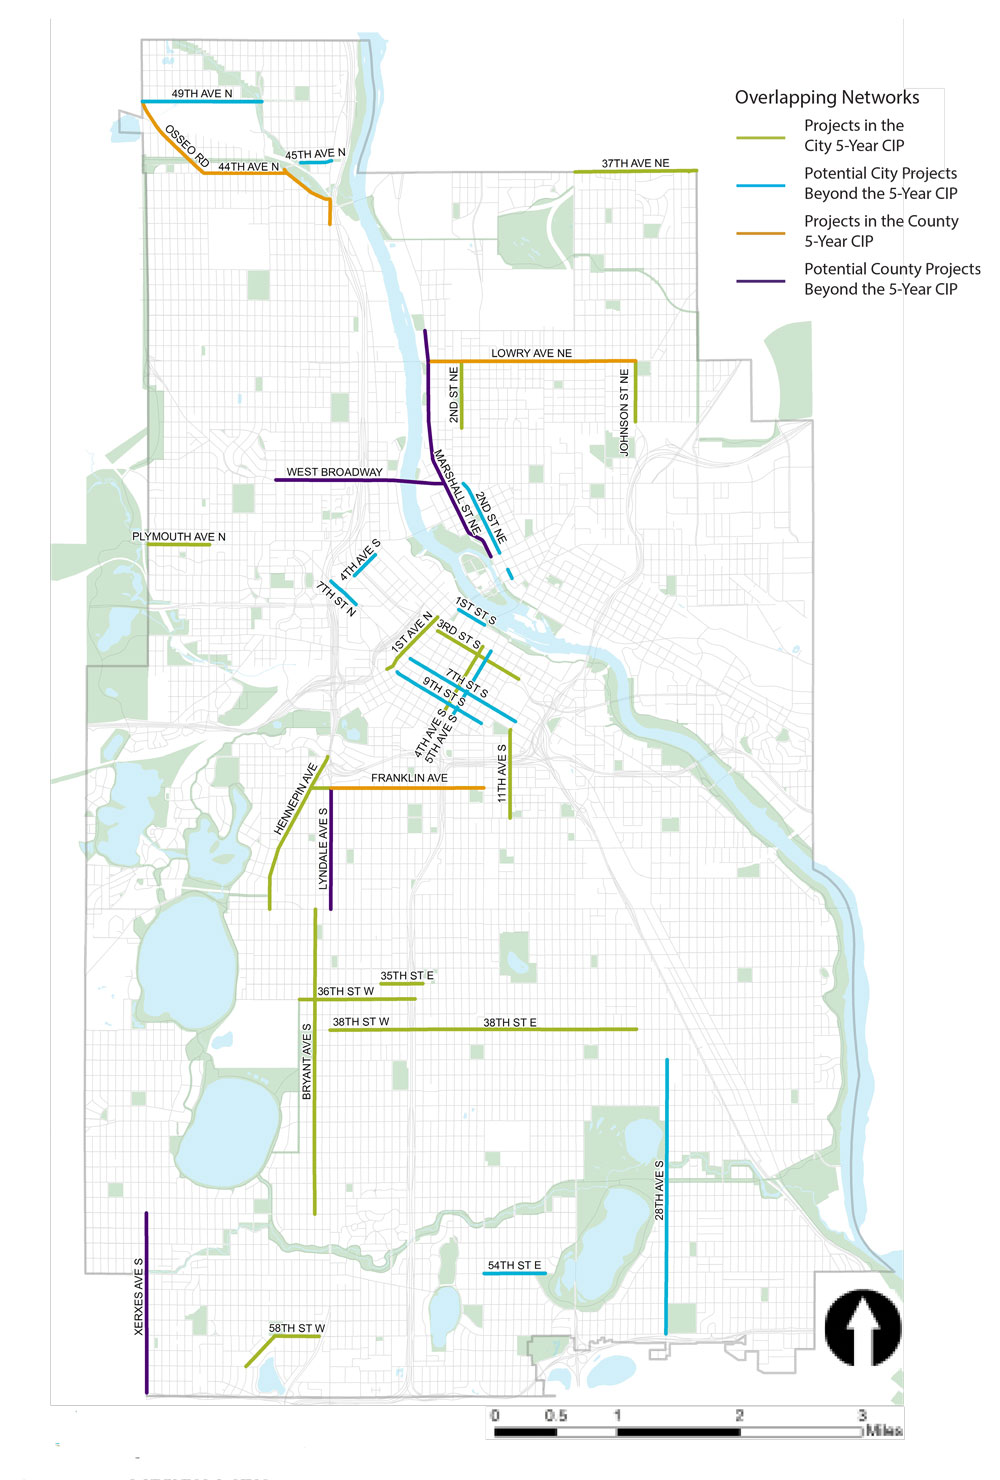 Map showing projects in the City 5-year CIP, potential City projects beyond the 5-year CIP, projects in the County CIP, and all other overlapping projects